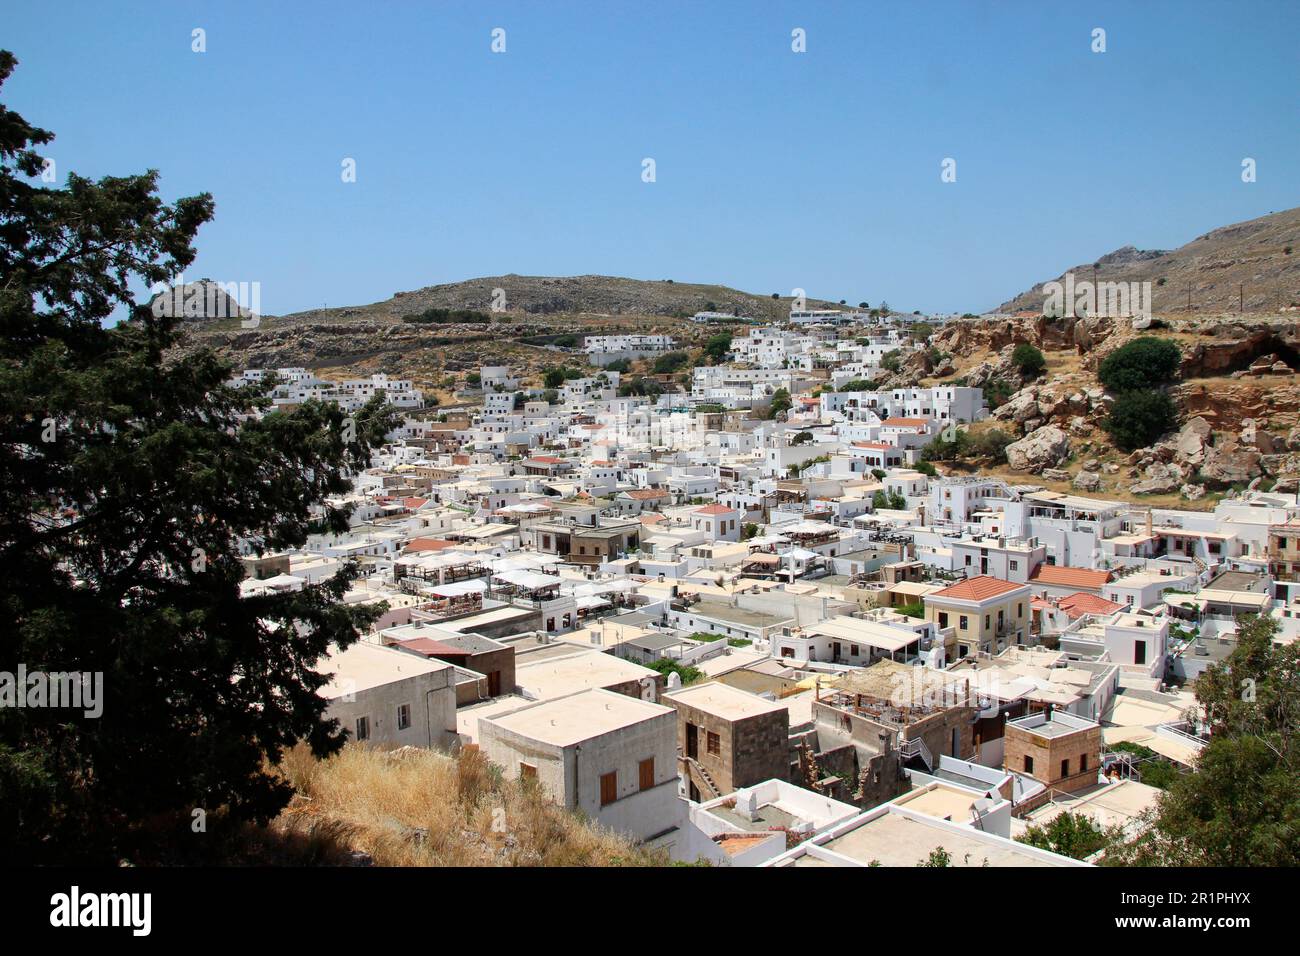 Greece, Rhodes Island, Lindos, city overview Europe, Dodecanese, island, Aegean Sea, southern Sporades, archipelago, coast, houses, residential, overview, exterior Stock Photo